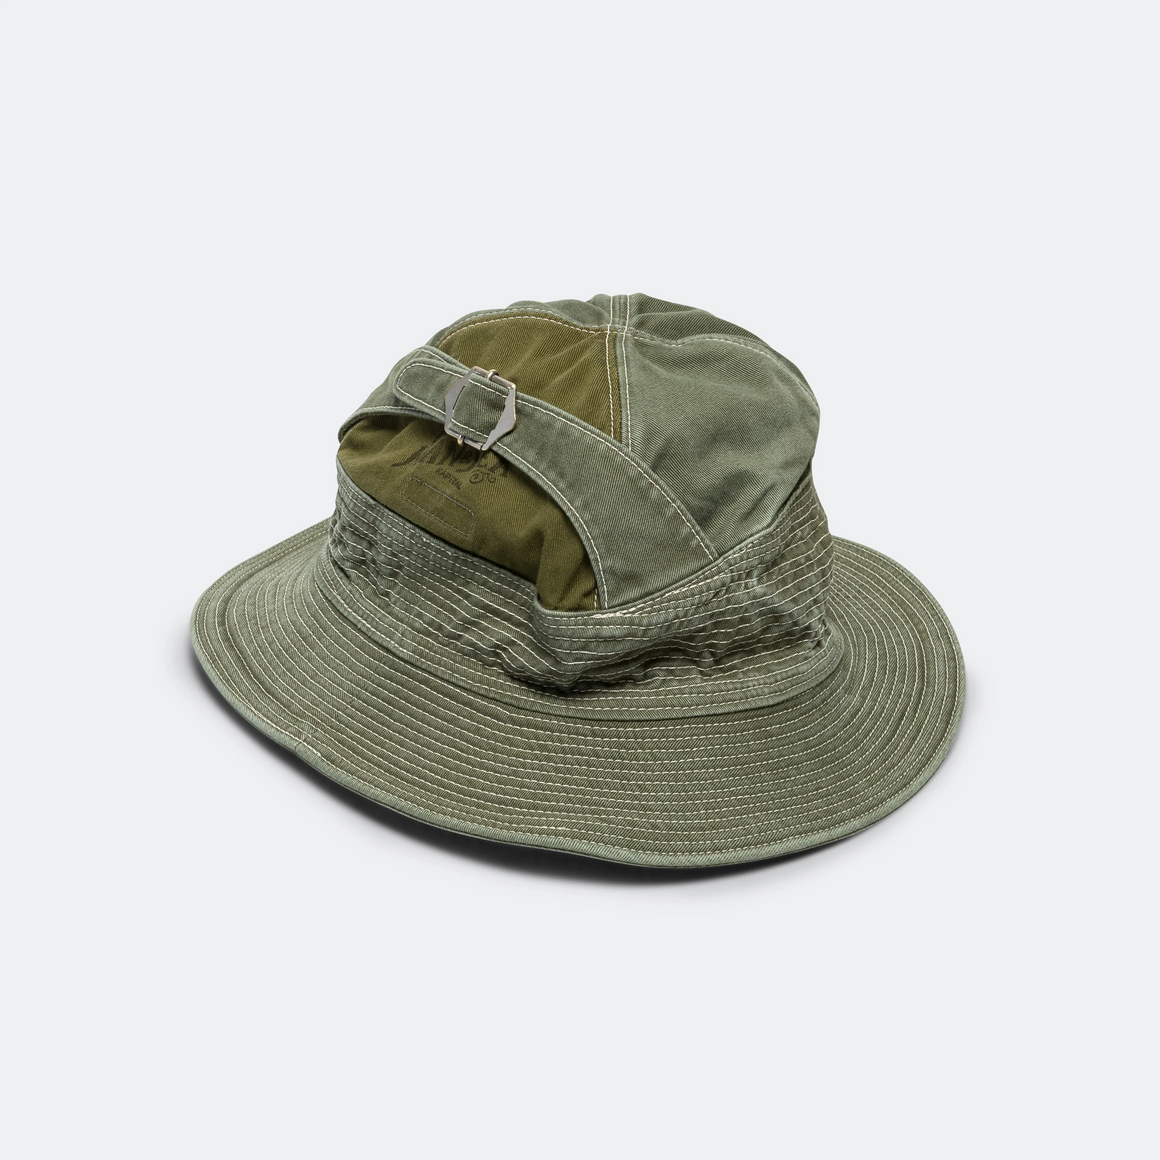 Kapital - Chino THE OLD MAN AND THE SEA Hat - Khaki - UP THERE